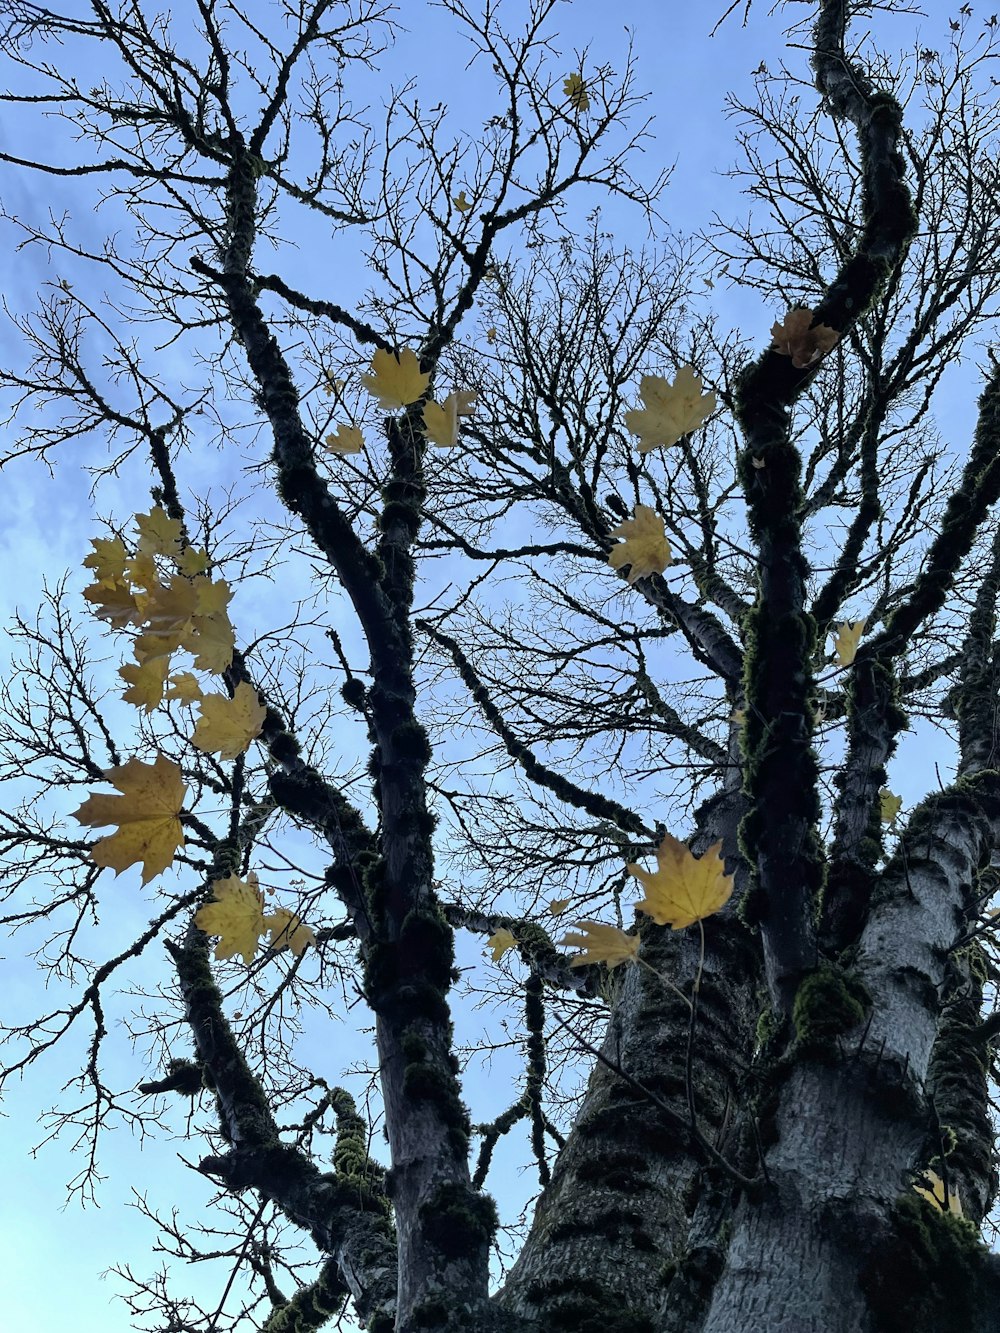 a tree with yellow leaves on it and a blue sky in the background